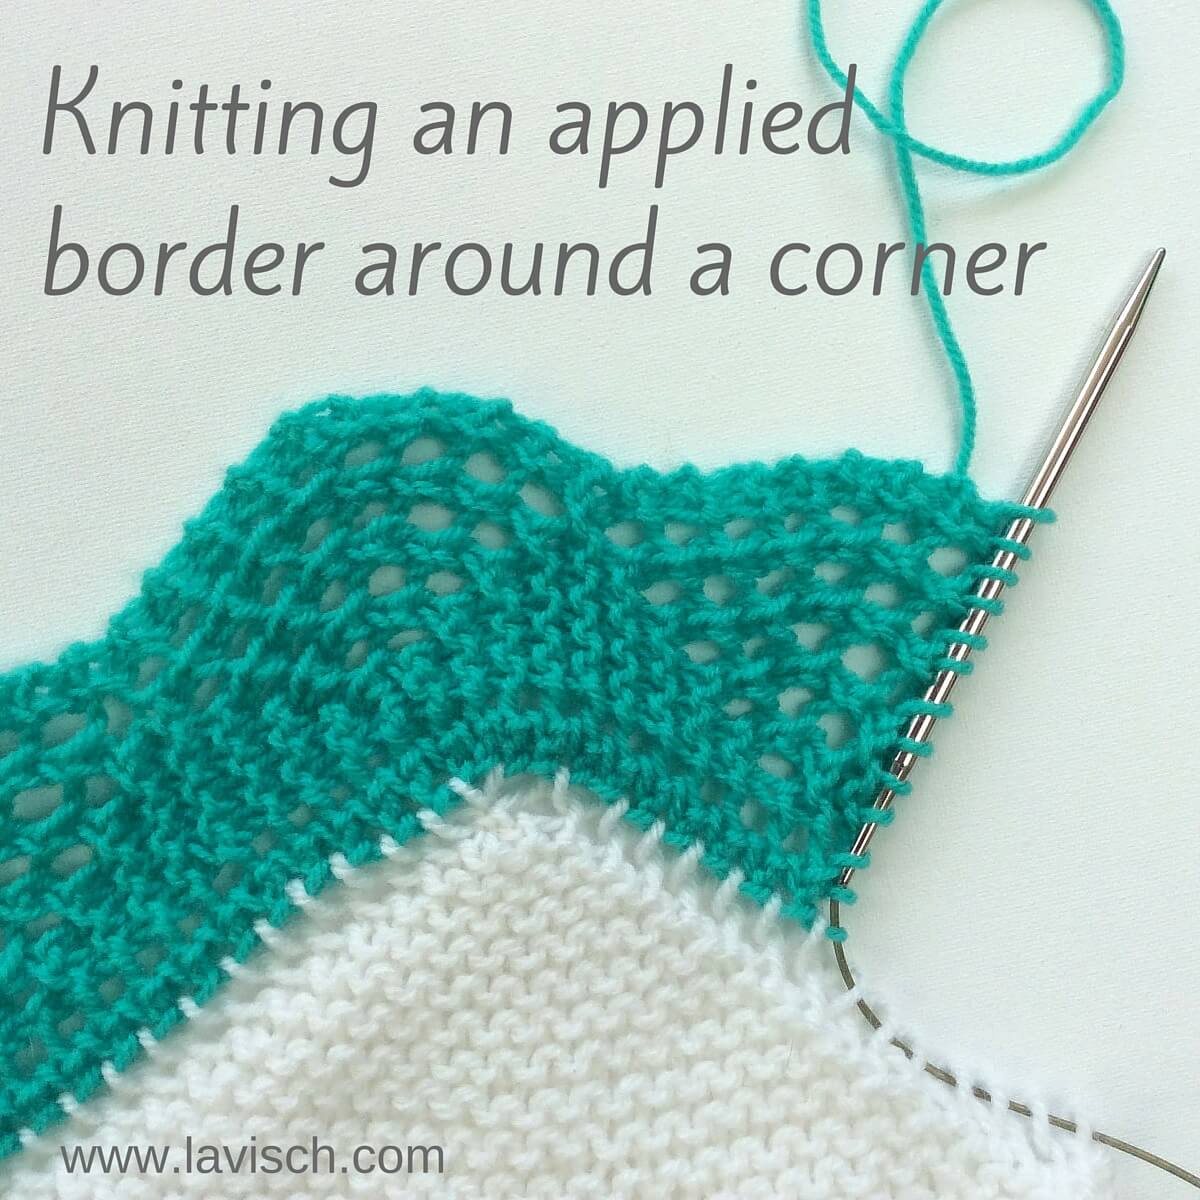 Easy Scallop Edge Knitting Pattern - Great for border and edging